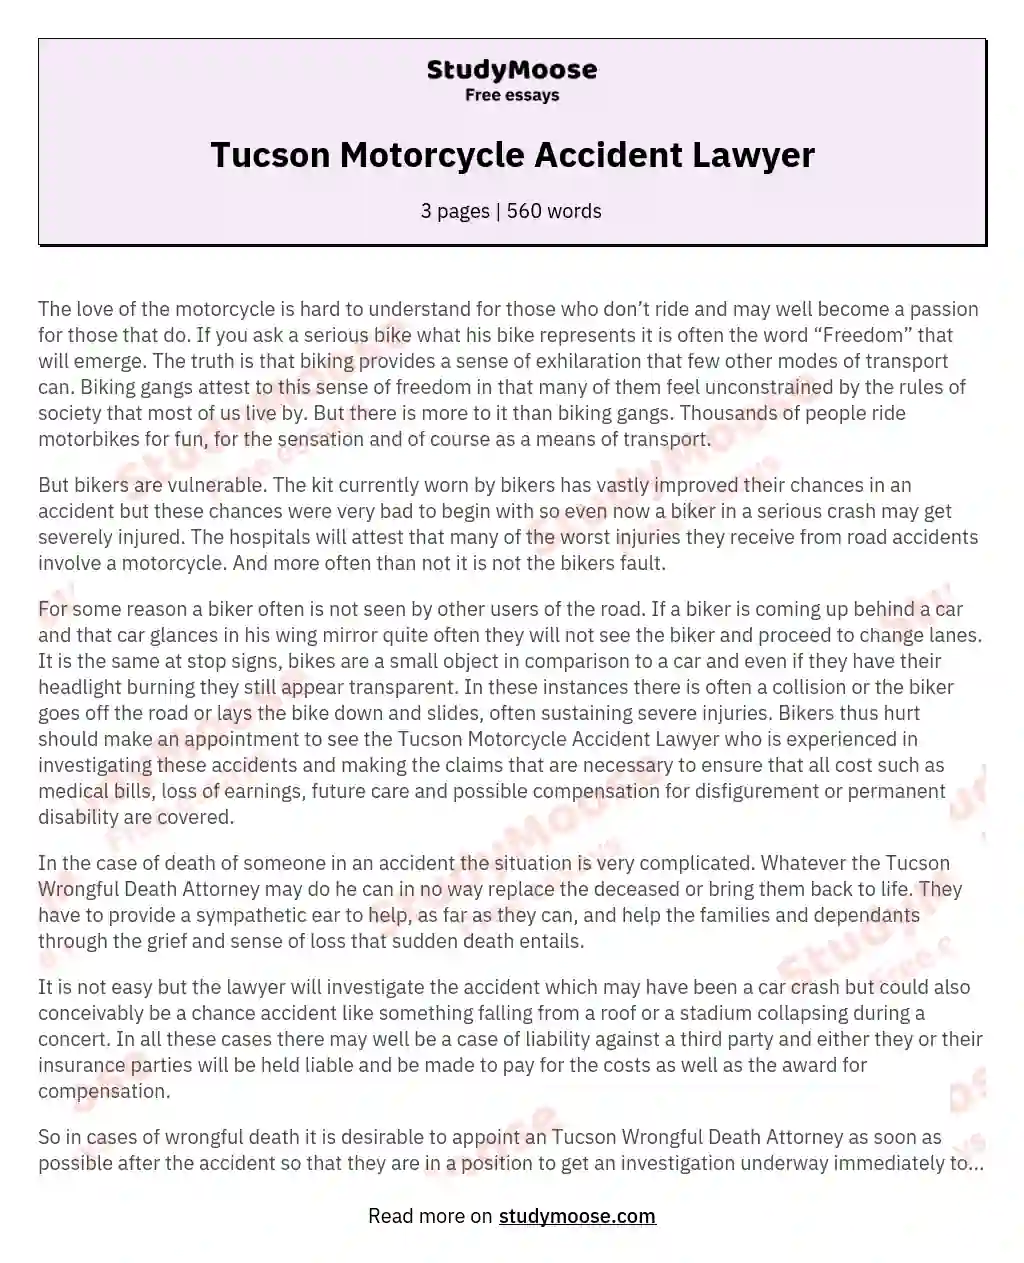 Tucson Motorcycle Accident Lawyer essay